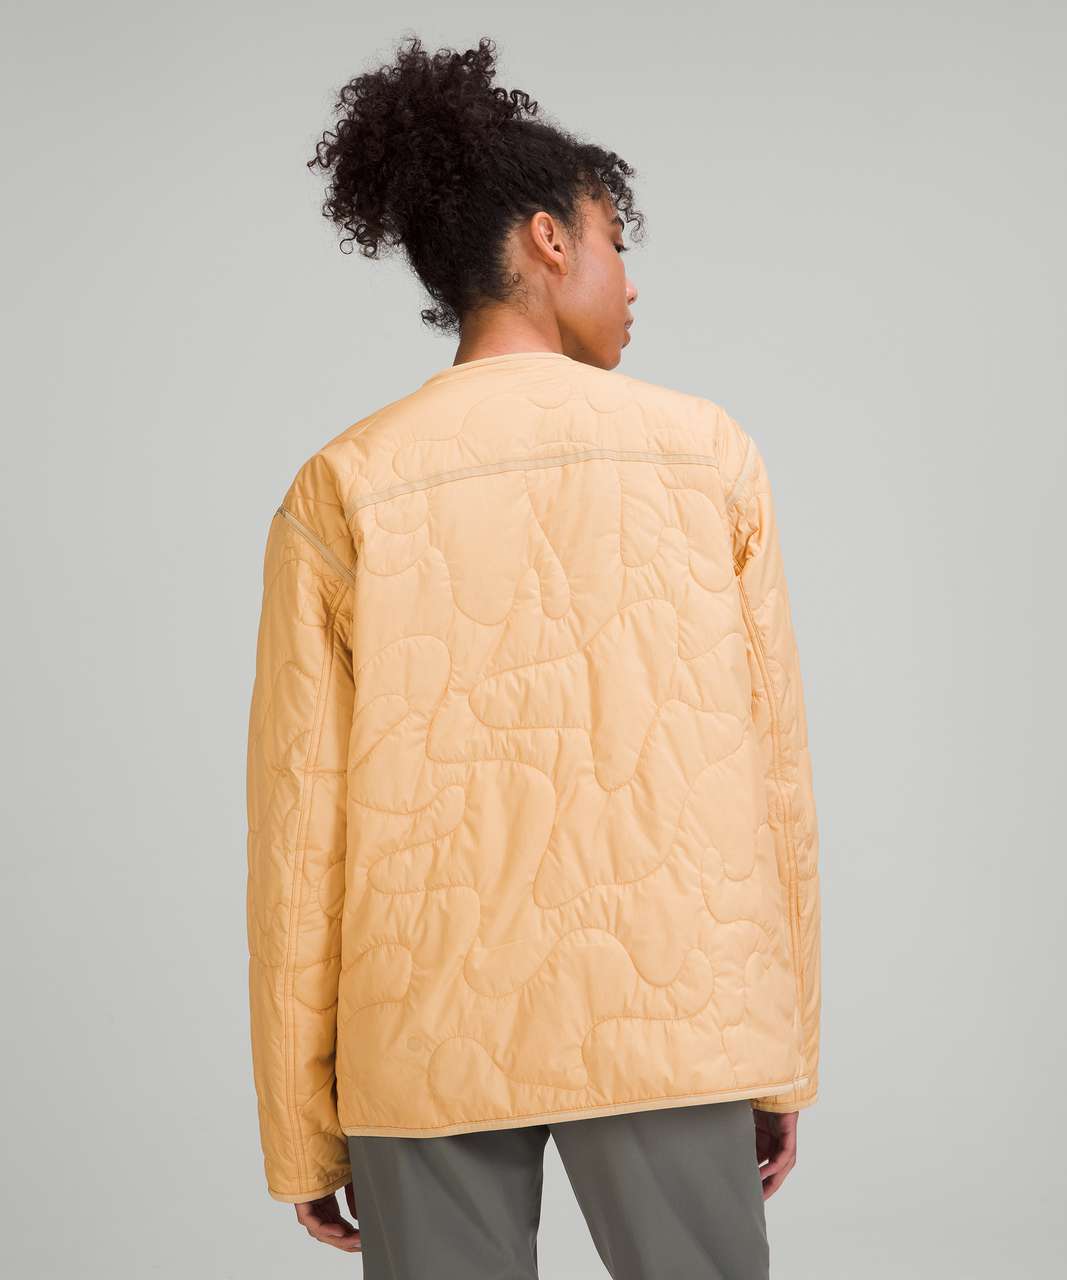 Lululemon Insulated Quilted Jacket - Heathered Pecan Tan